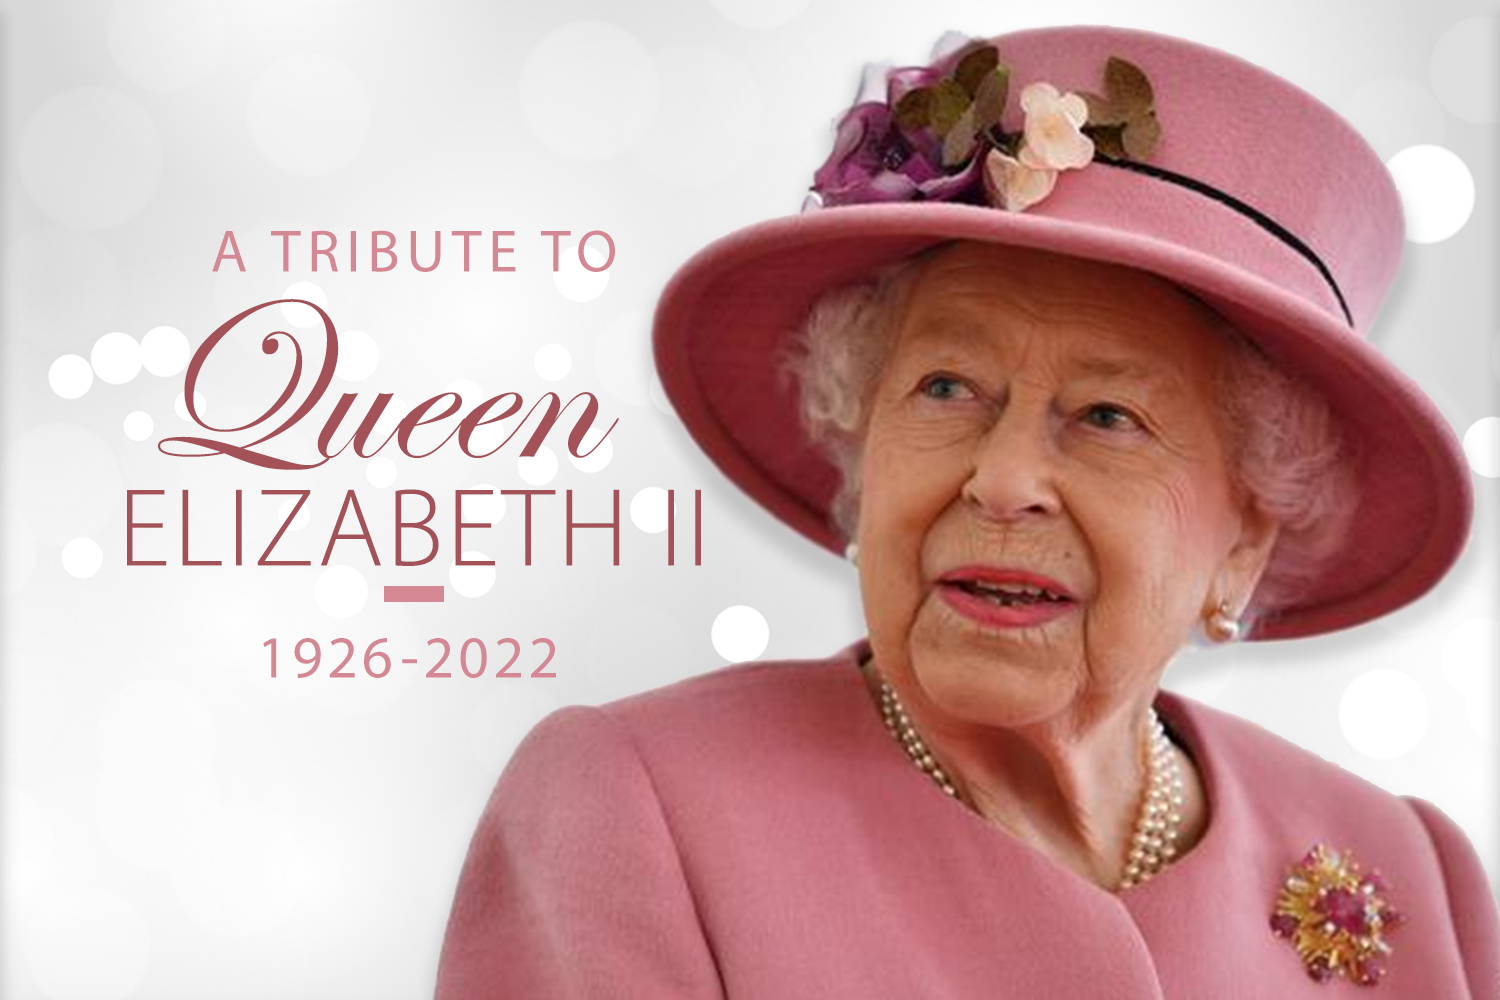 A Tribute To Queen Elizabeth II from Town of Wappinger